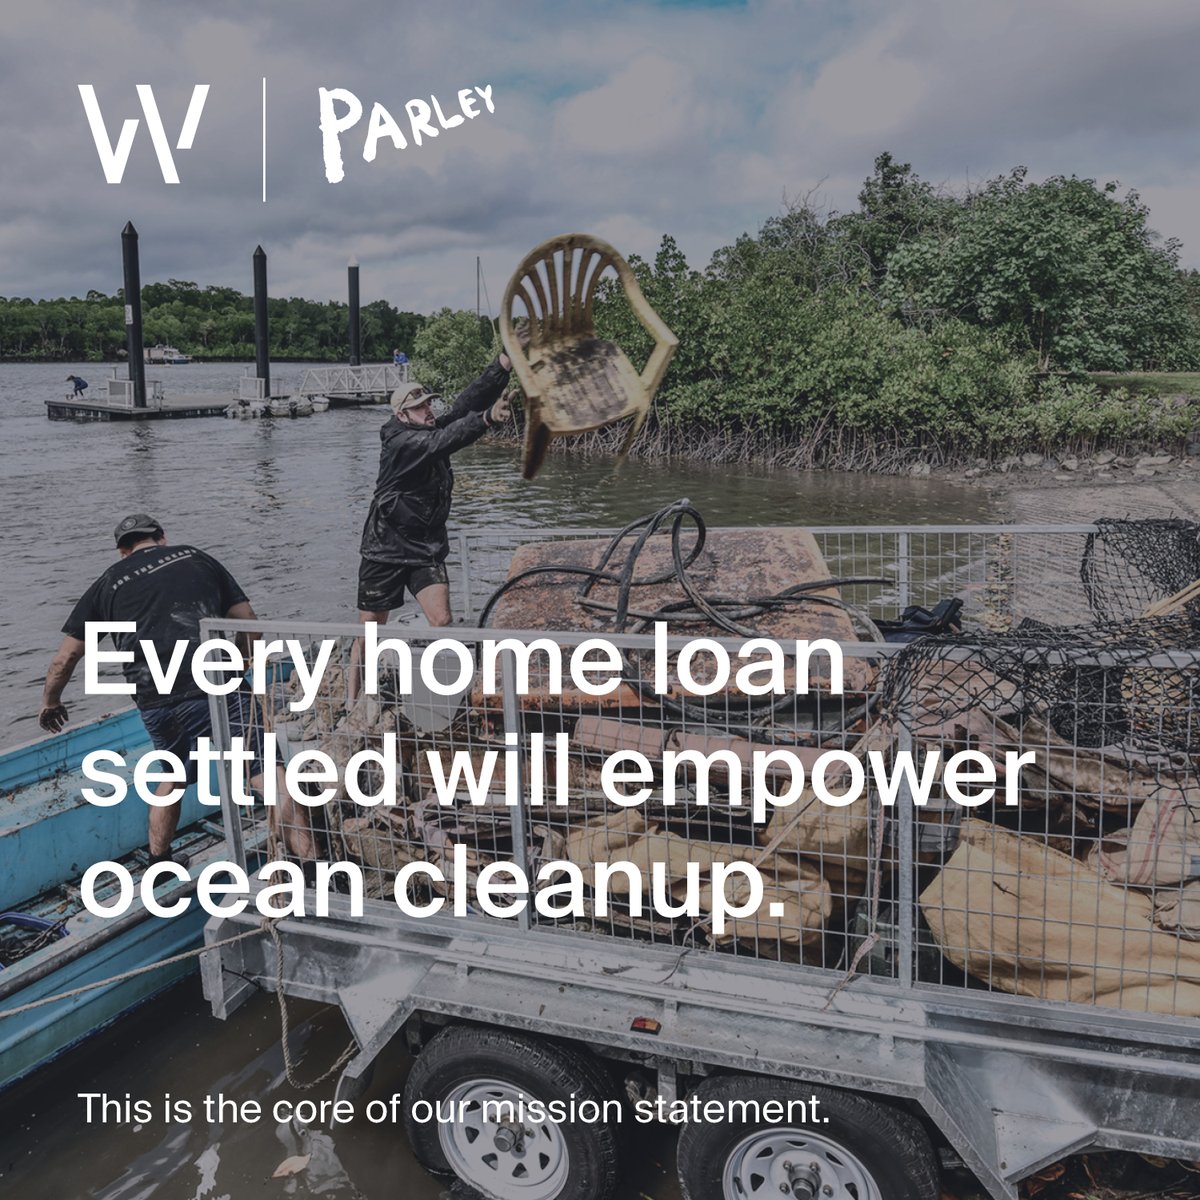 In partnership with @parleyforoceans, a global organisation that takes action against marine pollution, transforms intercepted plastic waste into the materials of tomorrow and supports marine research and material science.

#parley #beachcleanups #loansfortheoceans